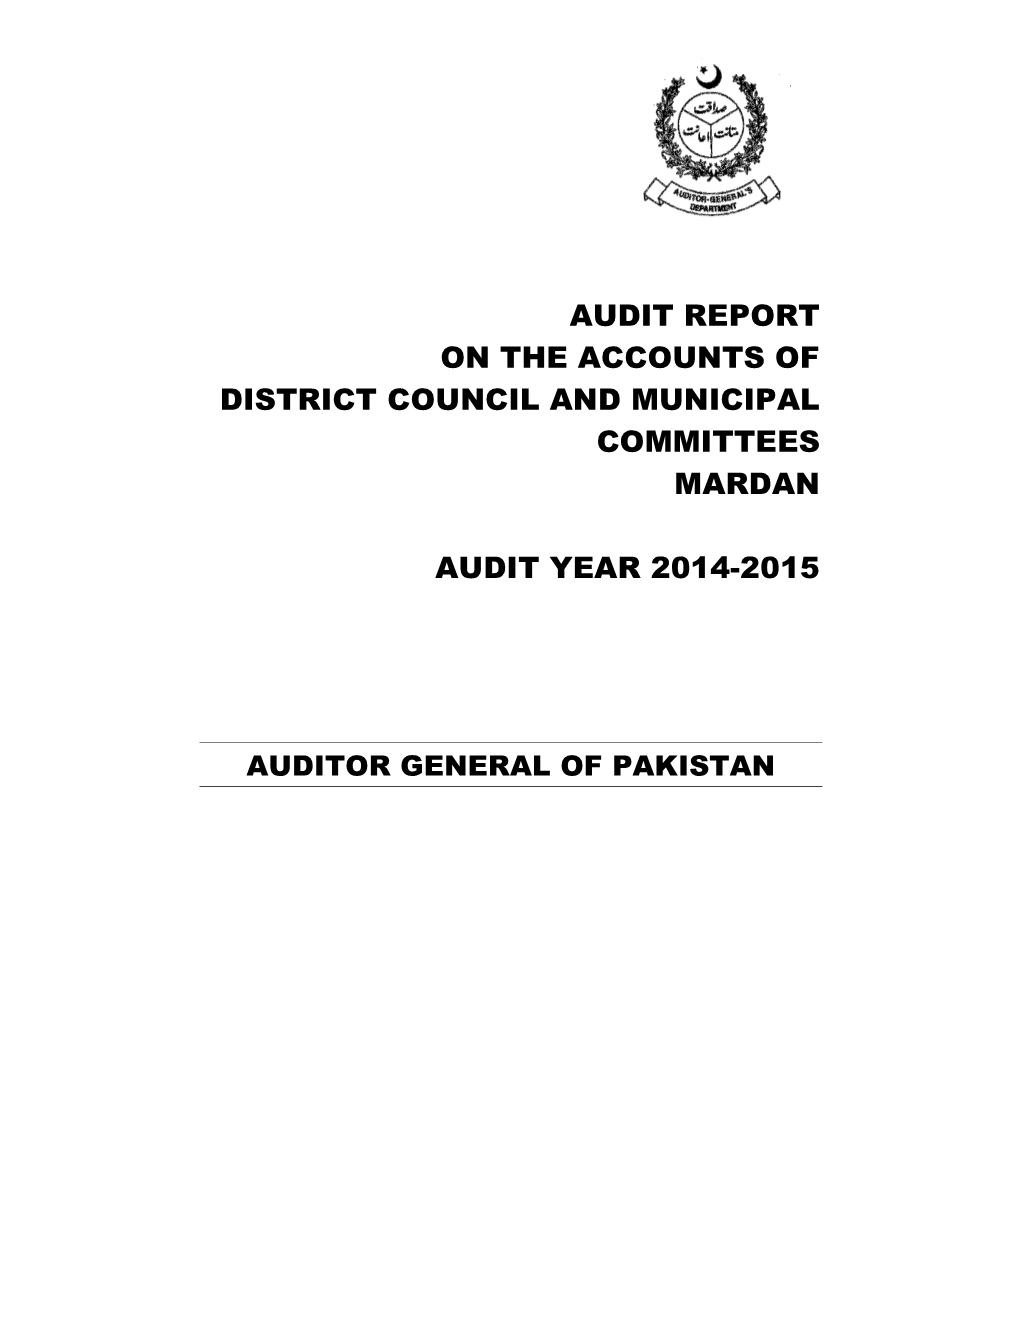 Audit Report on the Accounts of District Council and Municipal Committees Mardan